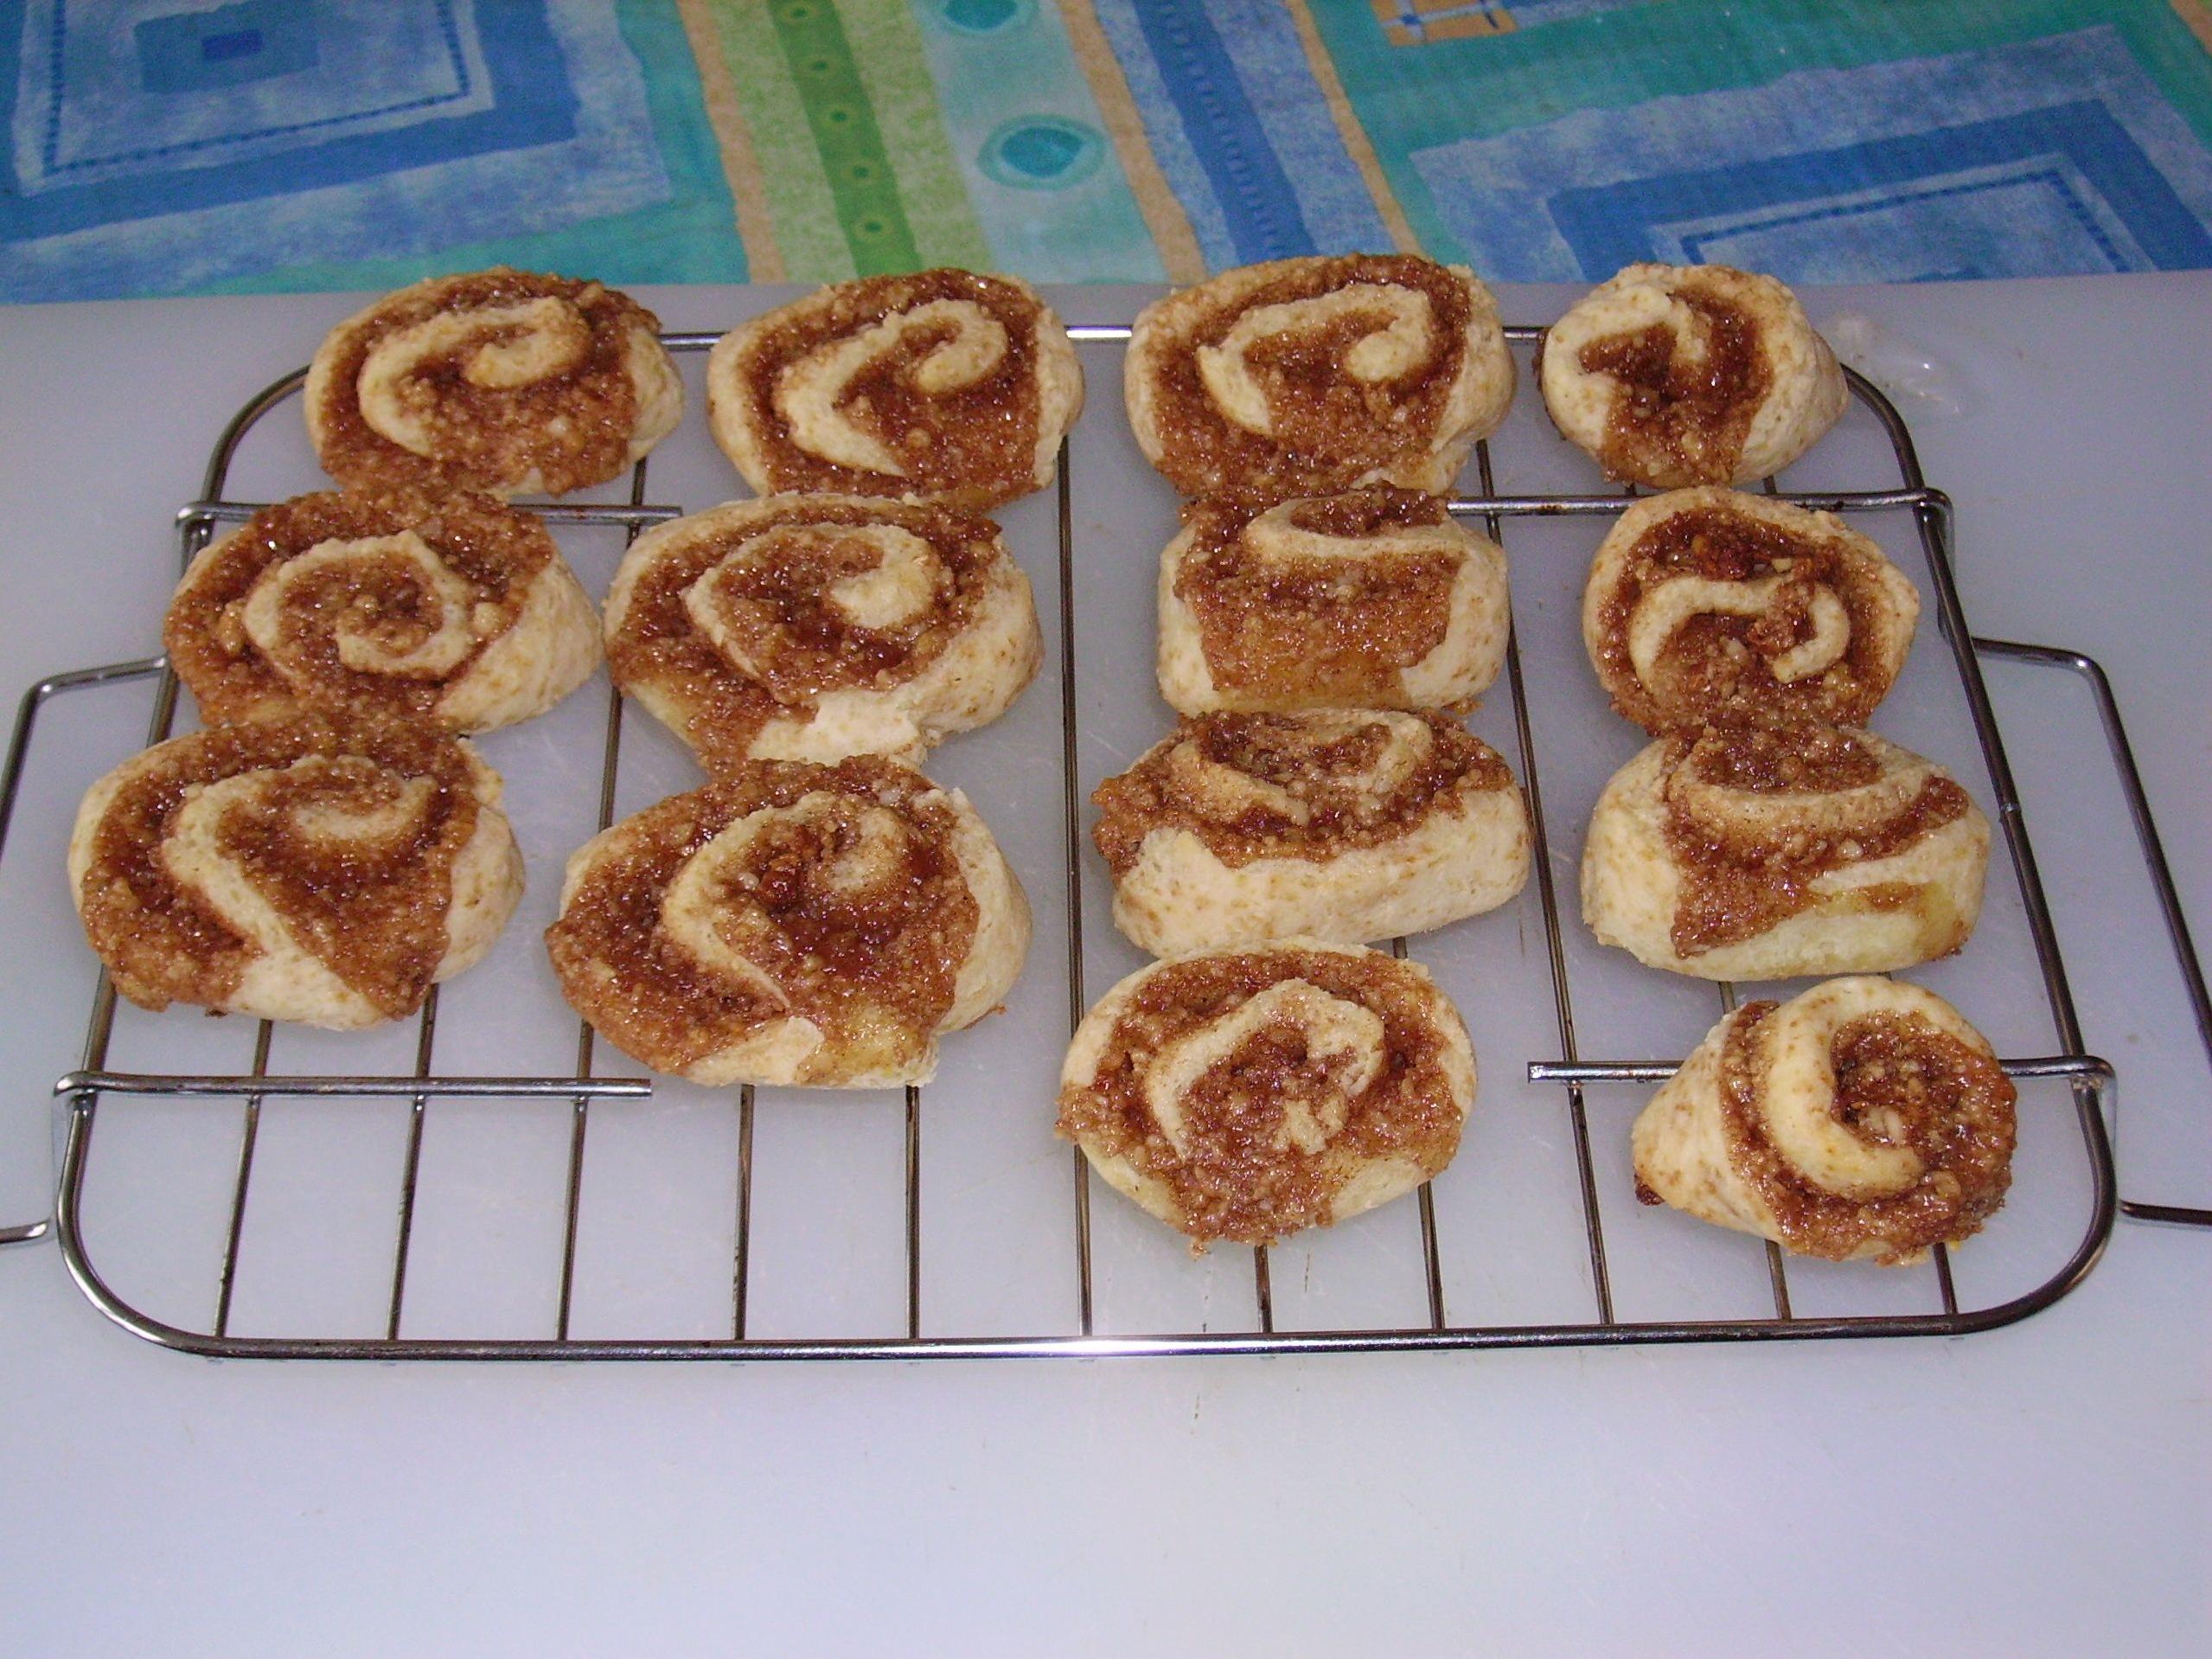  These cinnamon rolls are a tasty and healthy way to start your morning.